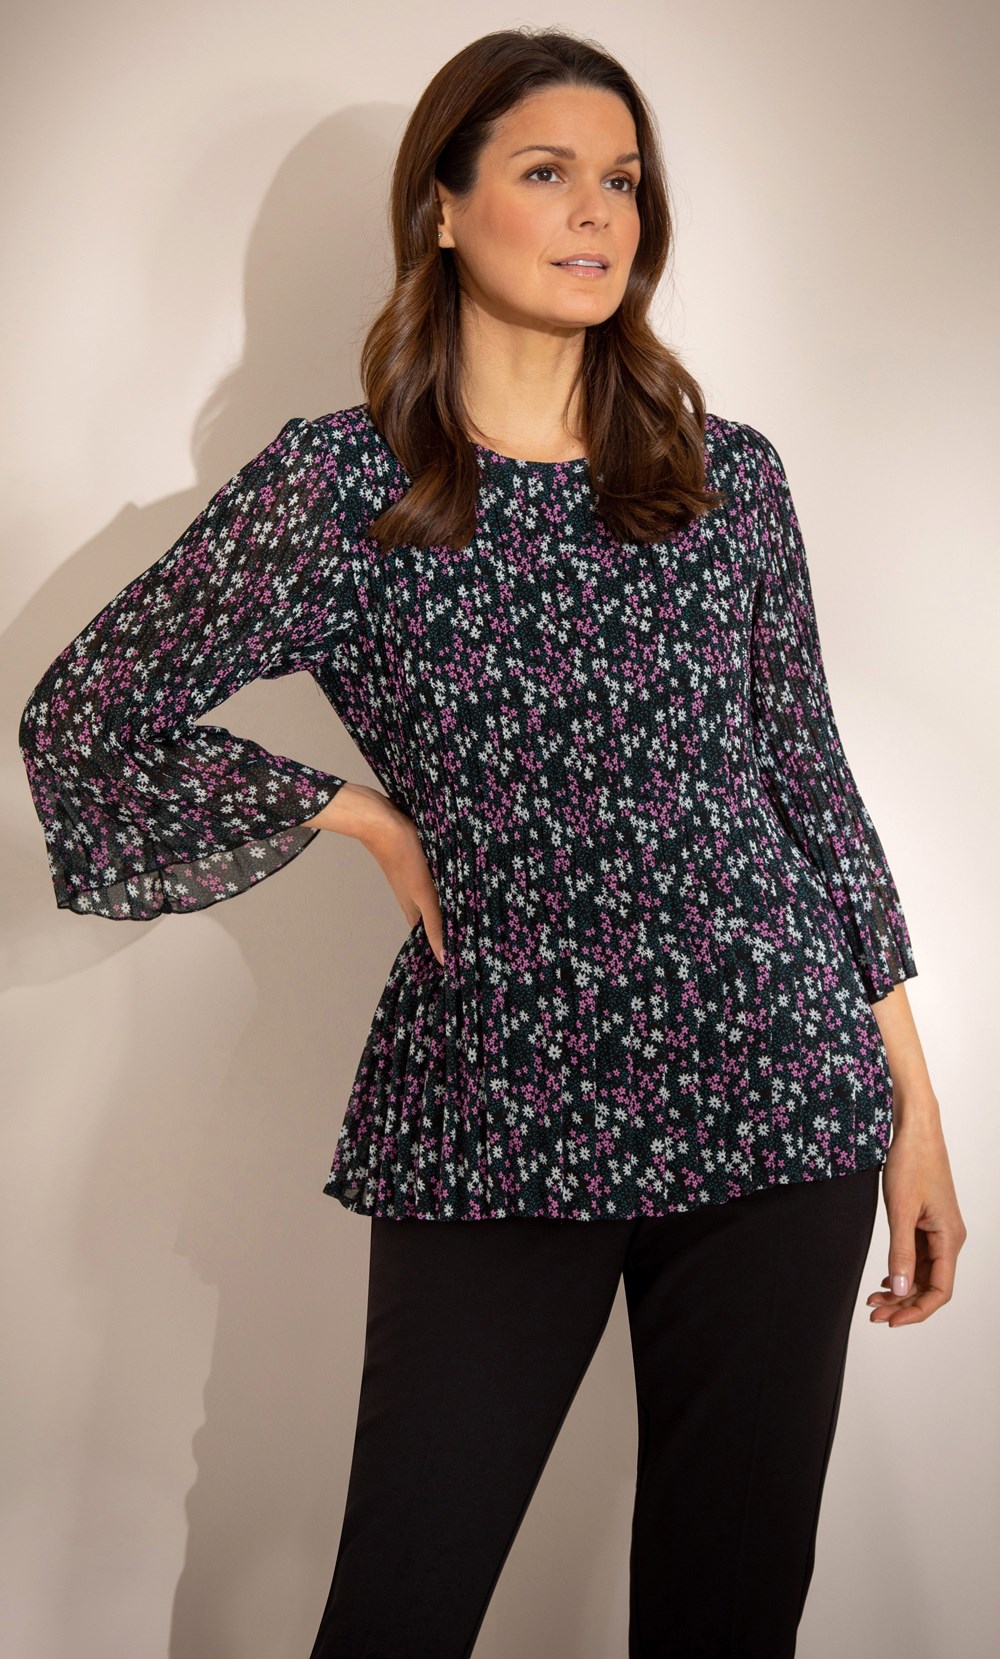 Pleated Floral Print Top